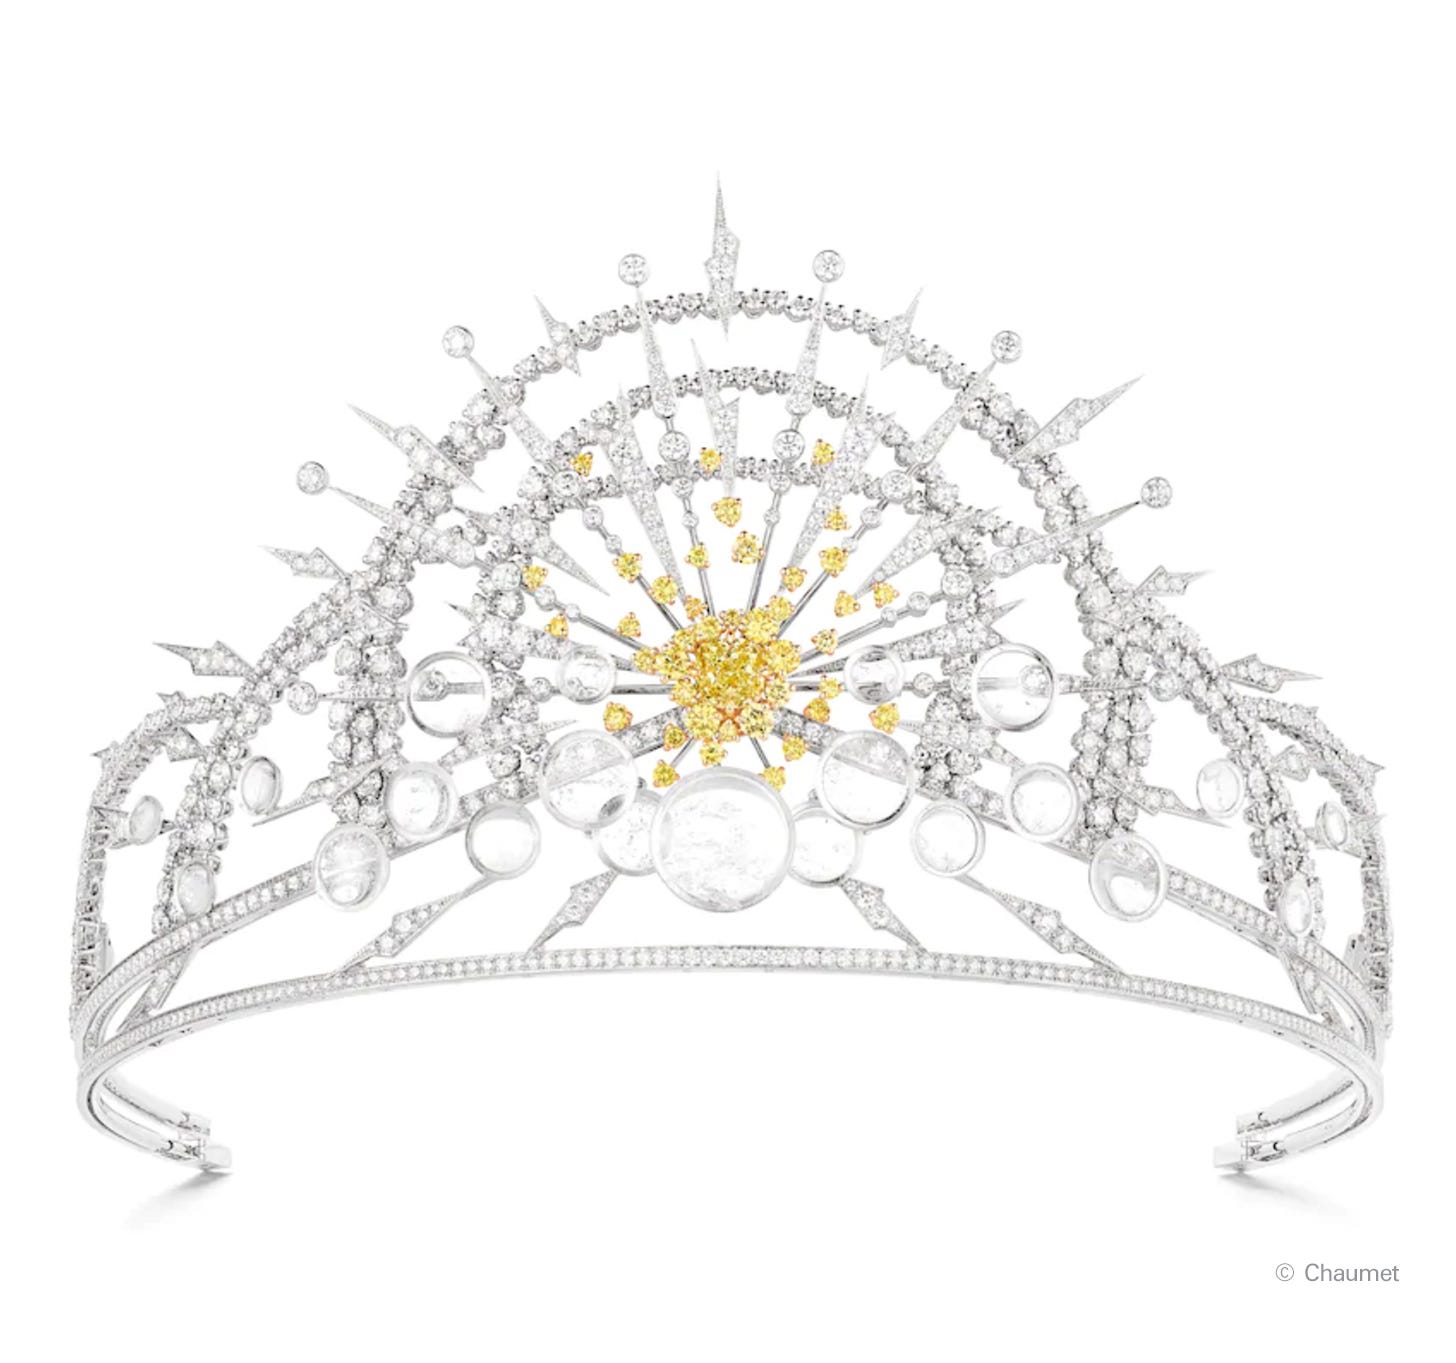 I wasn't done with the tiaras! - by Monica McLaughlin